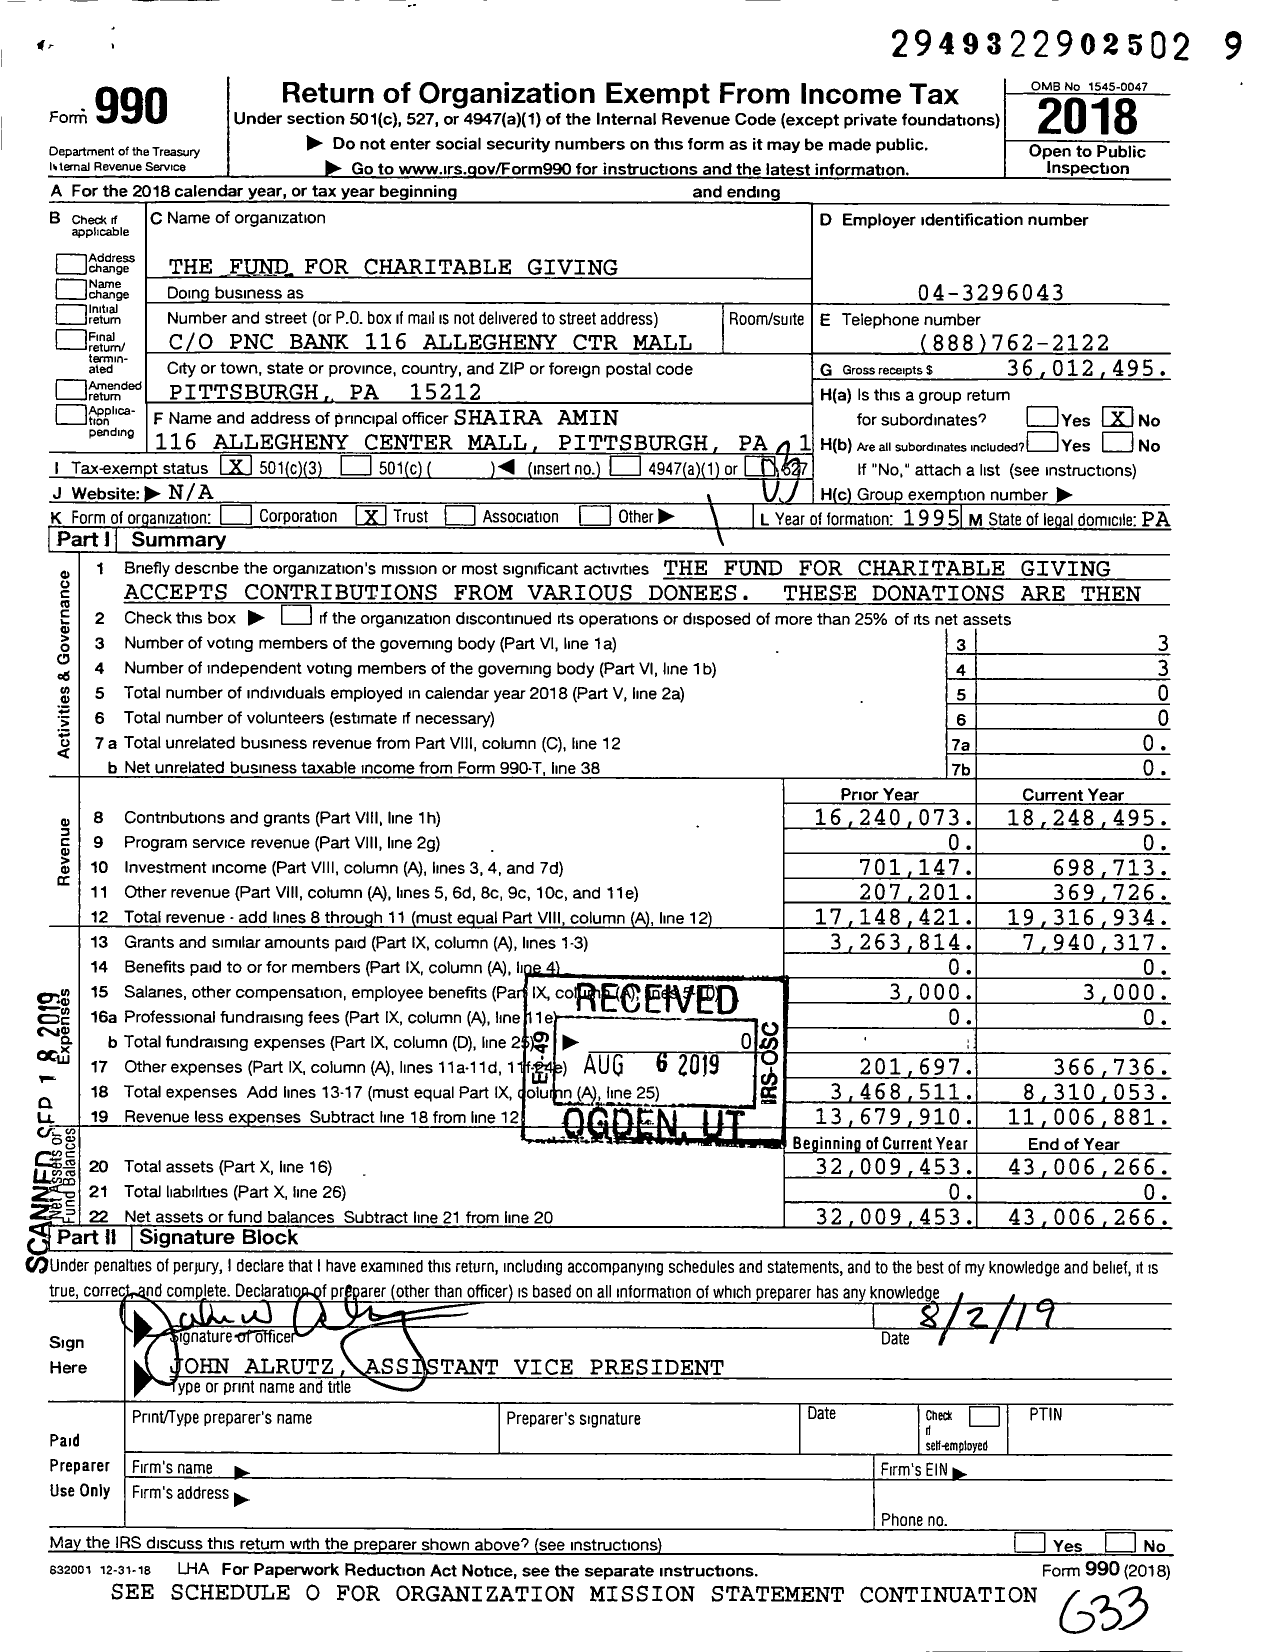 Image of first page of 2018 Form 990 for The Fund for Charitable Giving